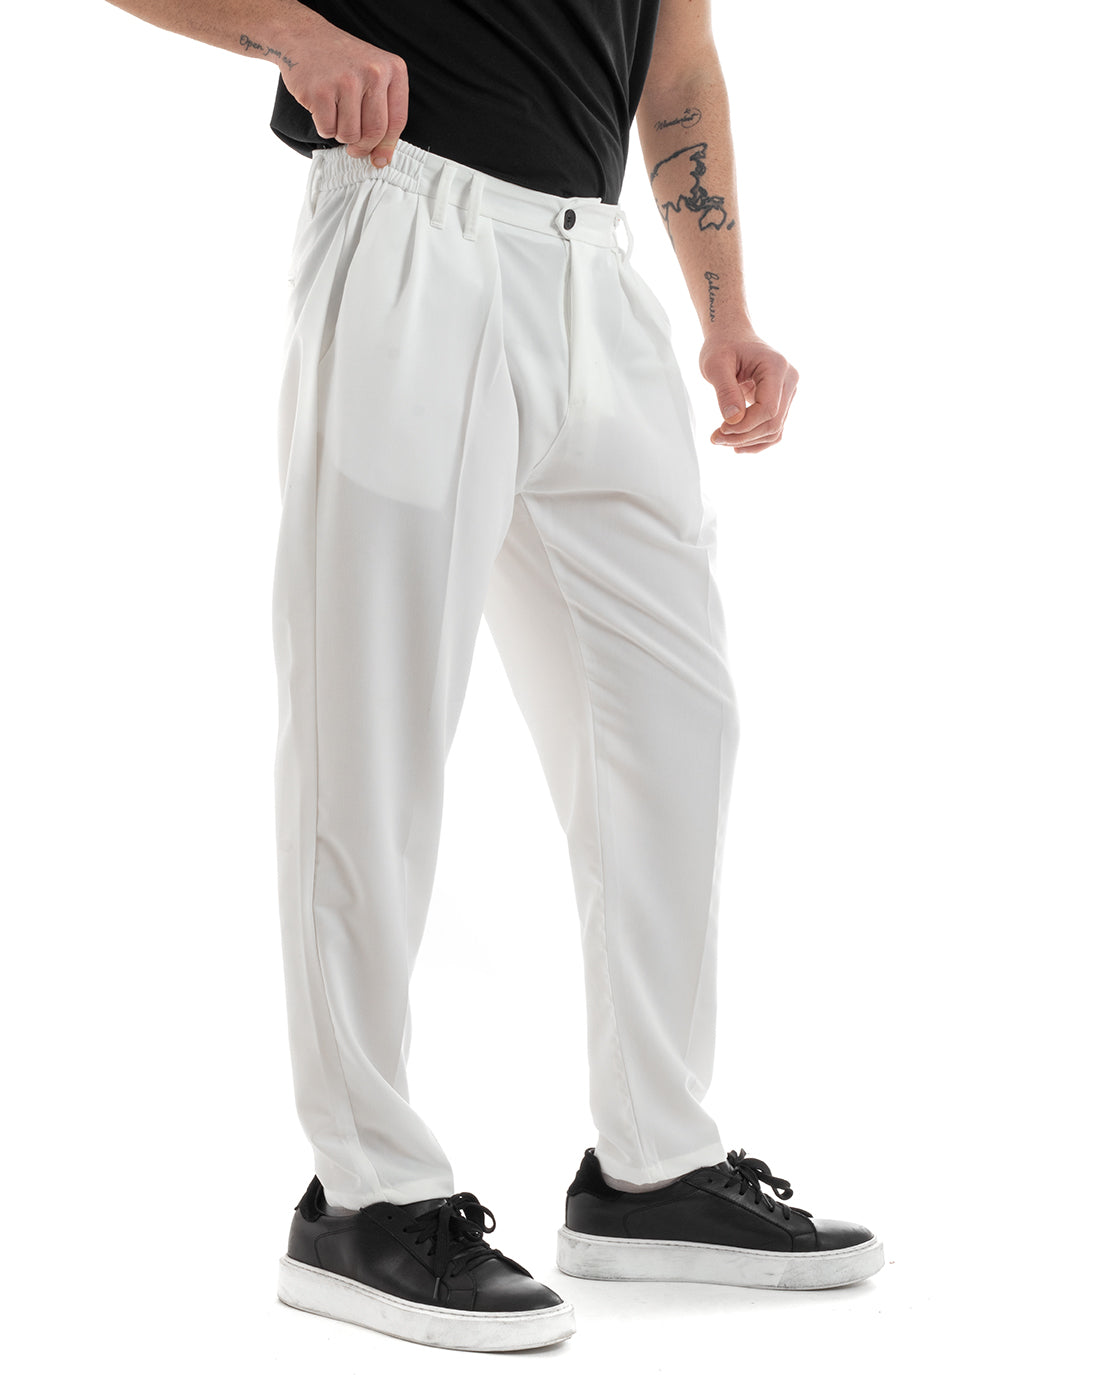 Long Viscose Men's Trousers Solid White Elastic Straight GIOSAL-P5649A